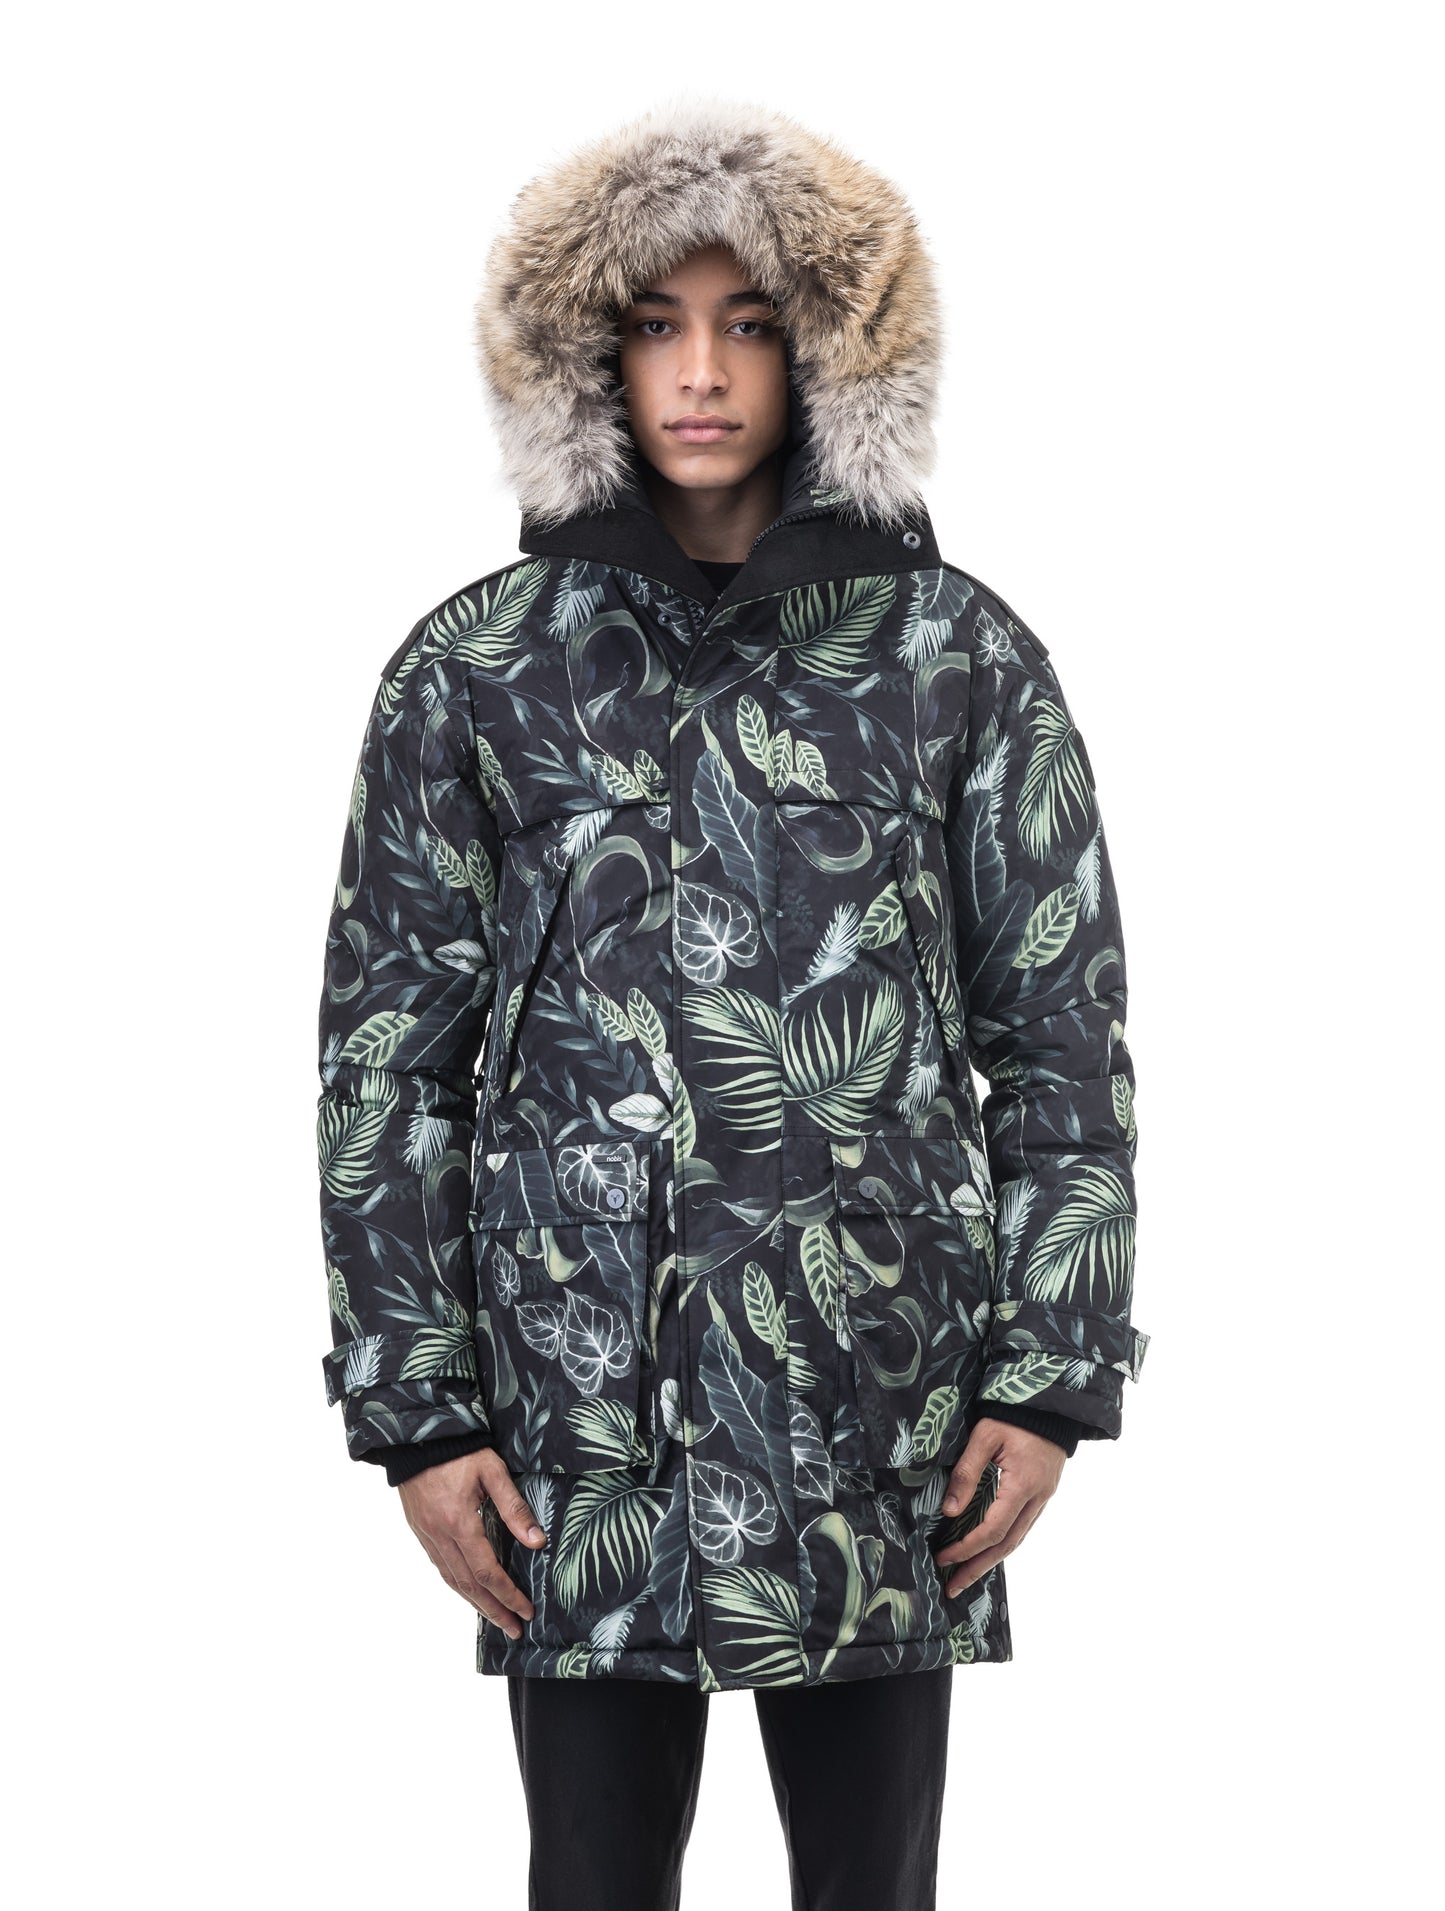 Men's Best Selling Parka the Yatesy is a down filled jacket with a zipper closure and magnetic placket in Foliage